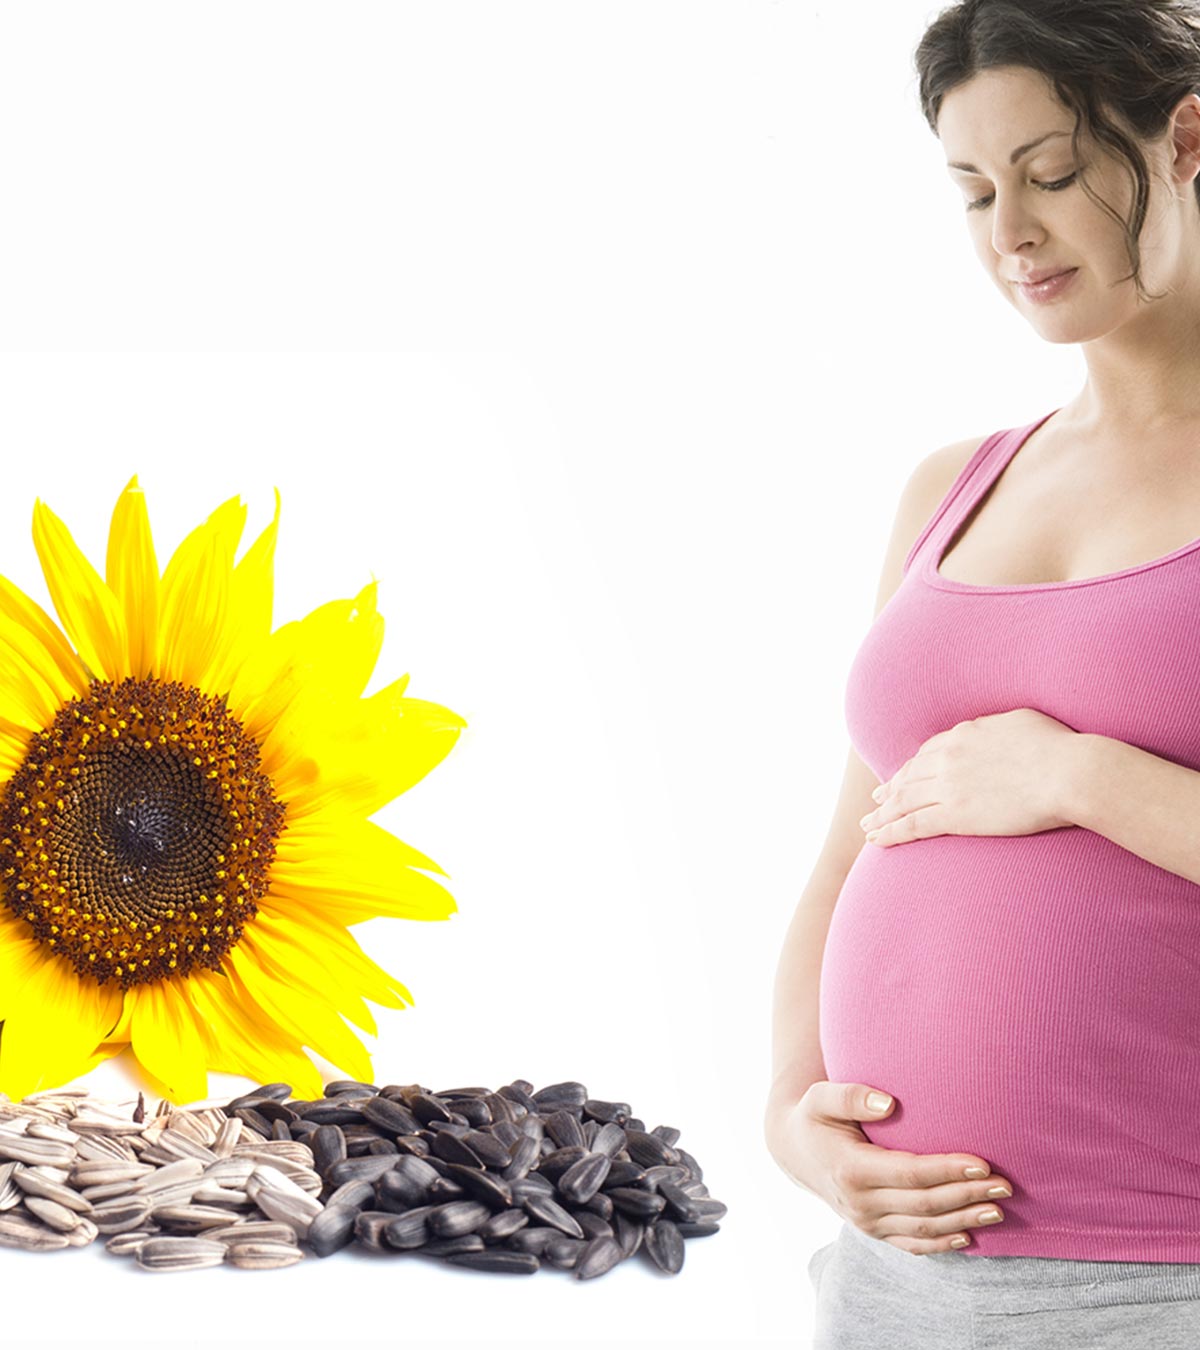 5 Best Benefits Of Eating Sunflower Seeds During Pregnancy